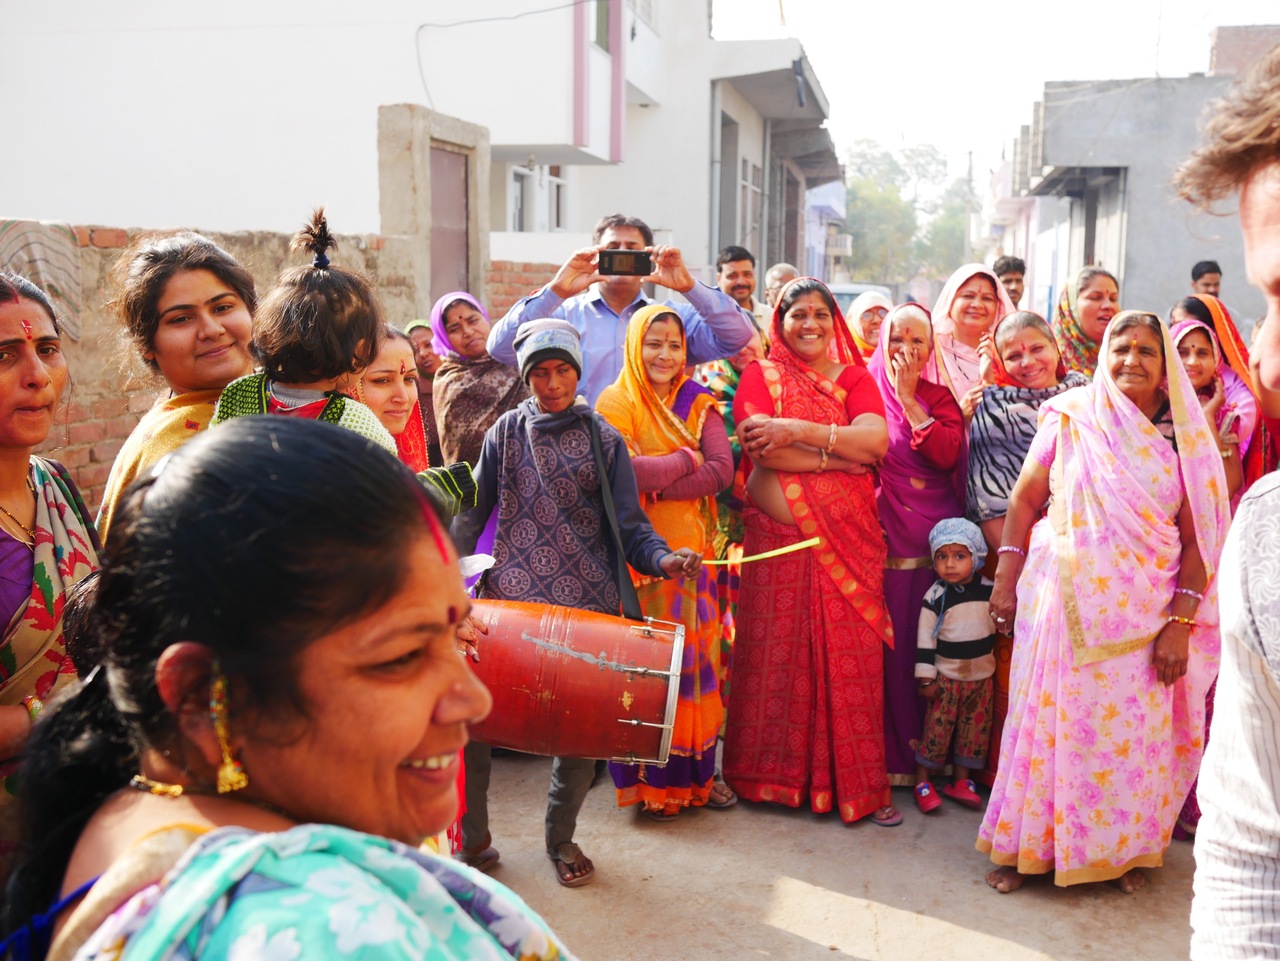 A small celebration at the streets of Bagru village.